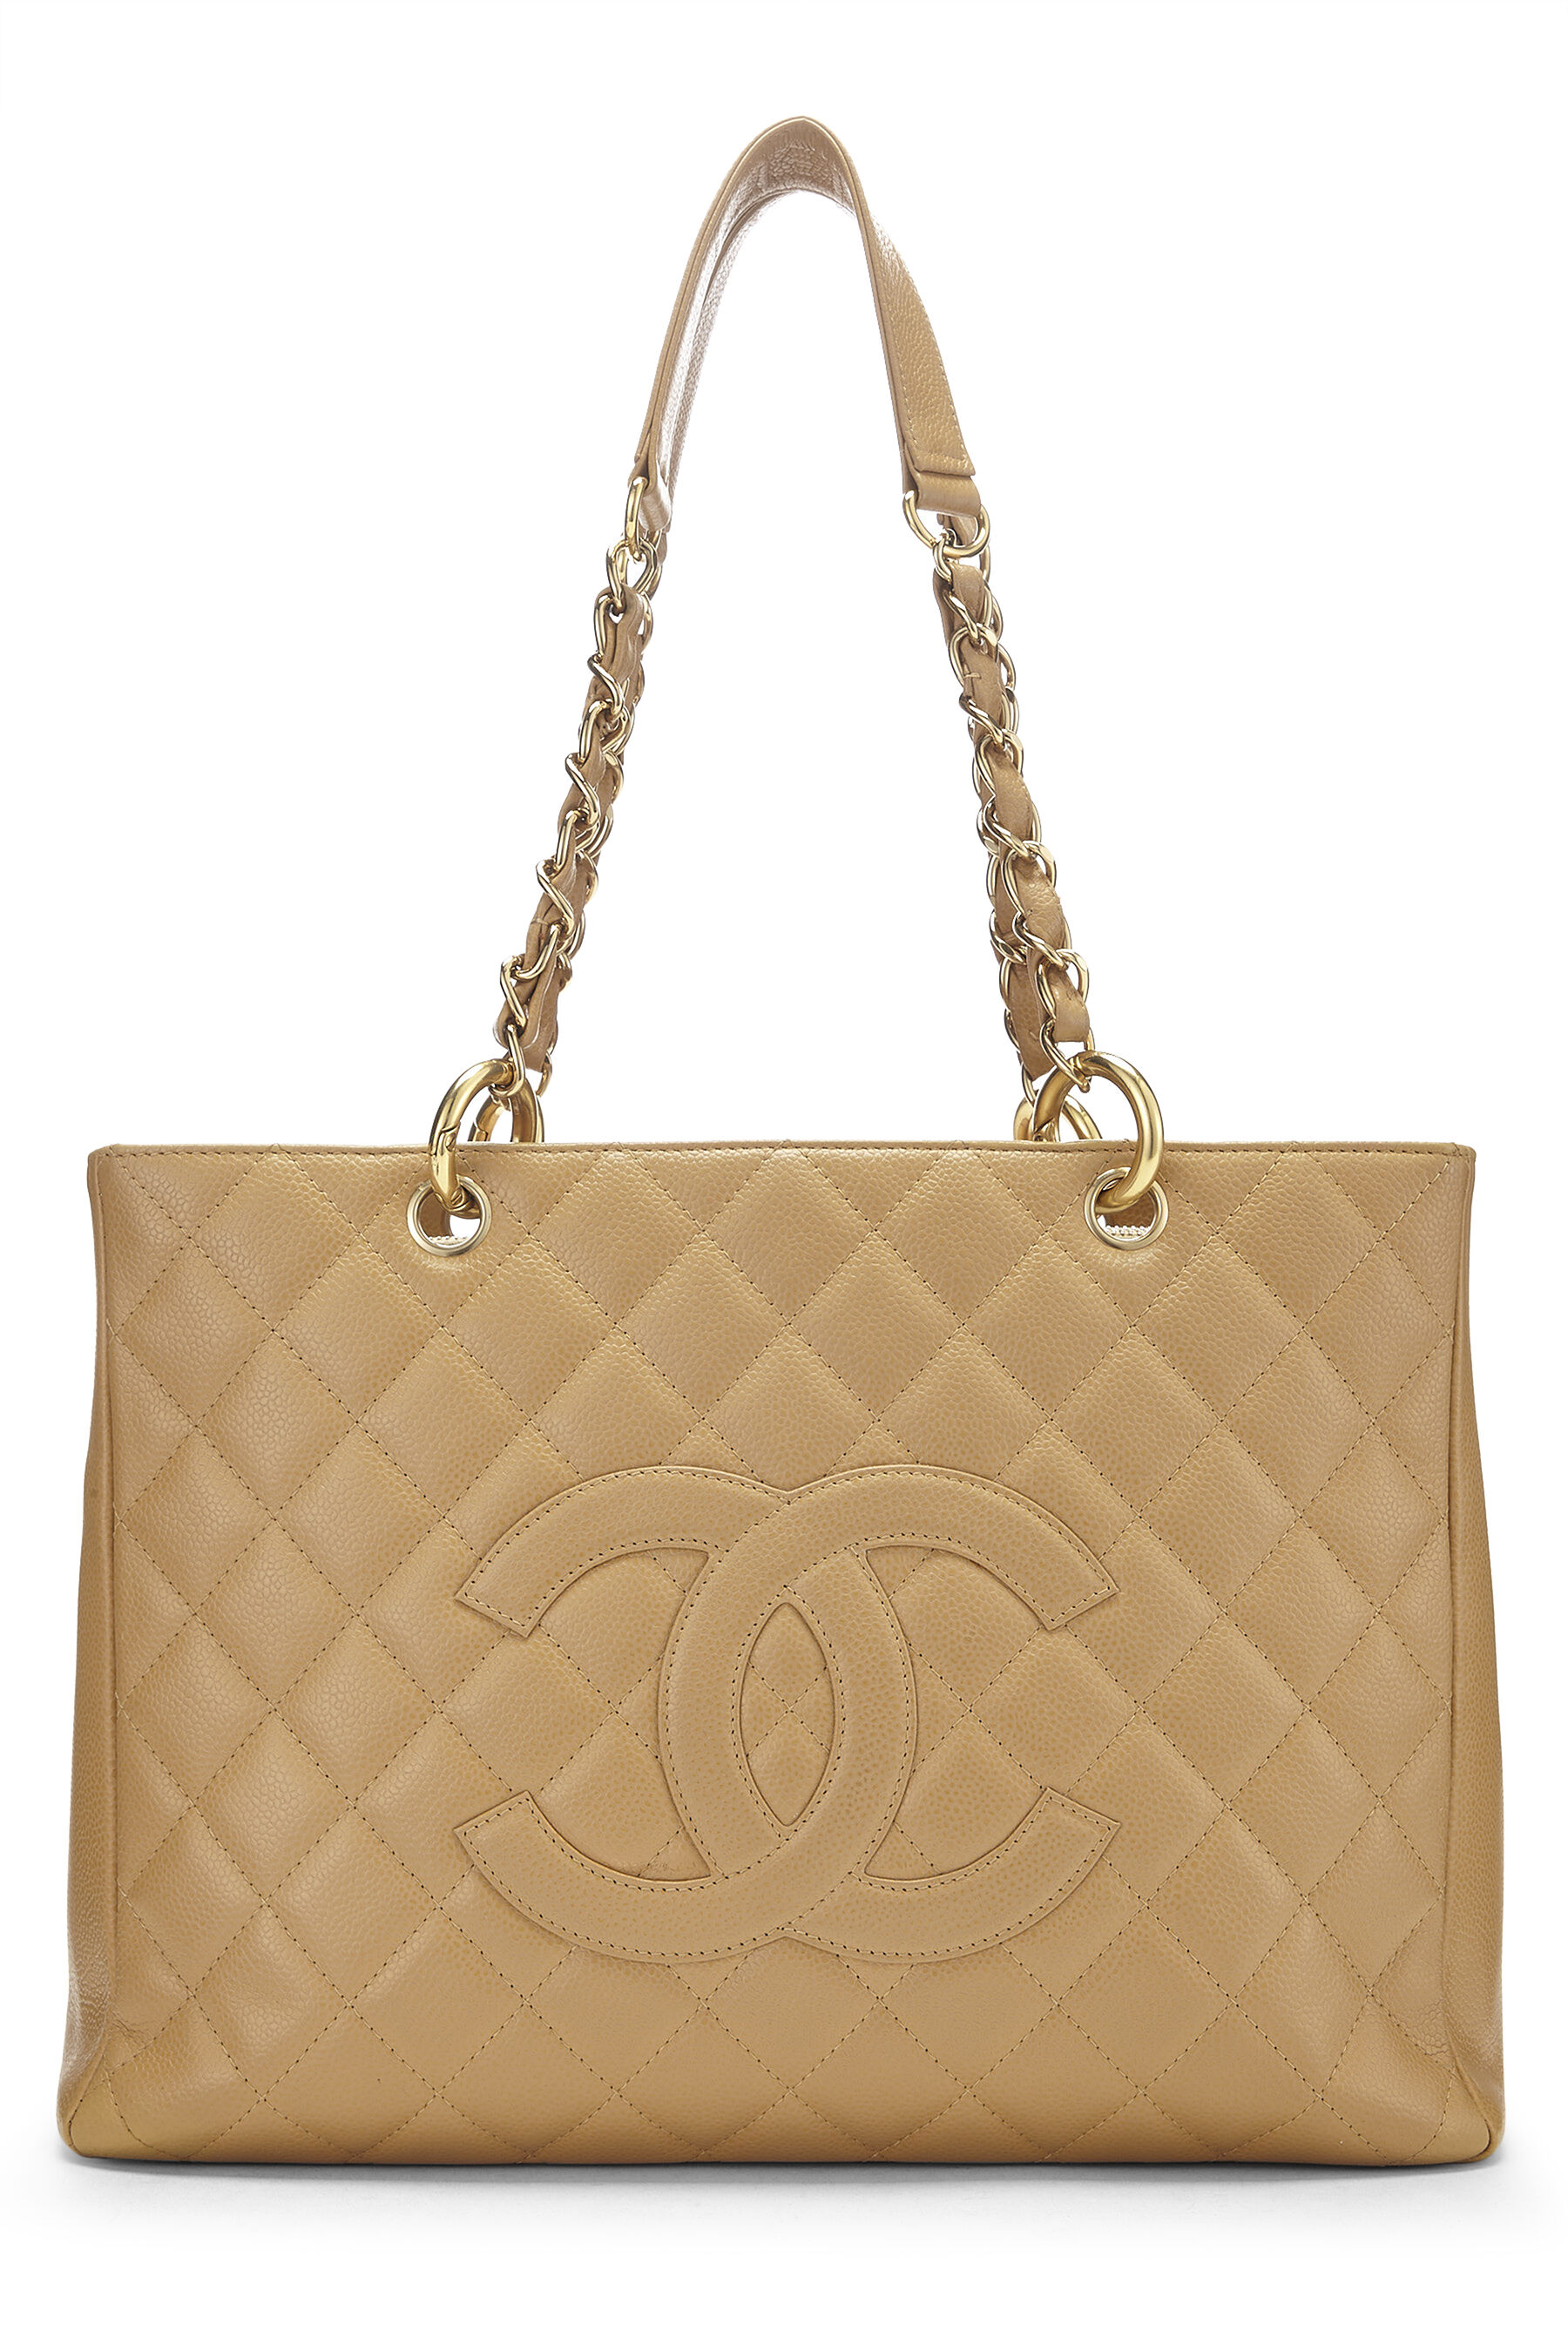 Chanel Beige Quilted Caviar Leather GST Grand Shopping Tote Bag